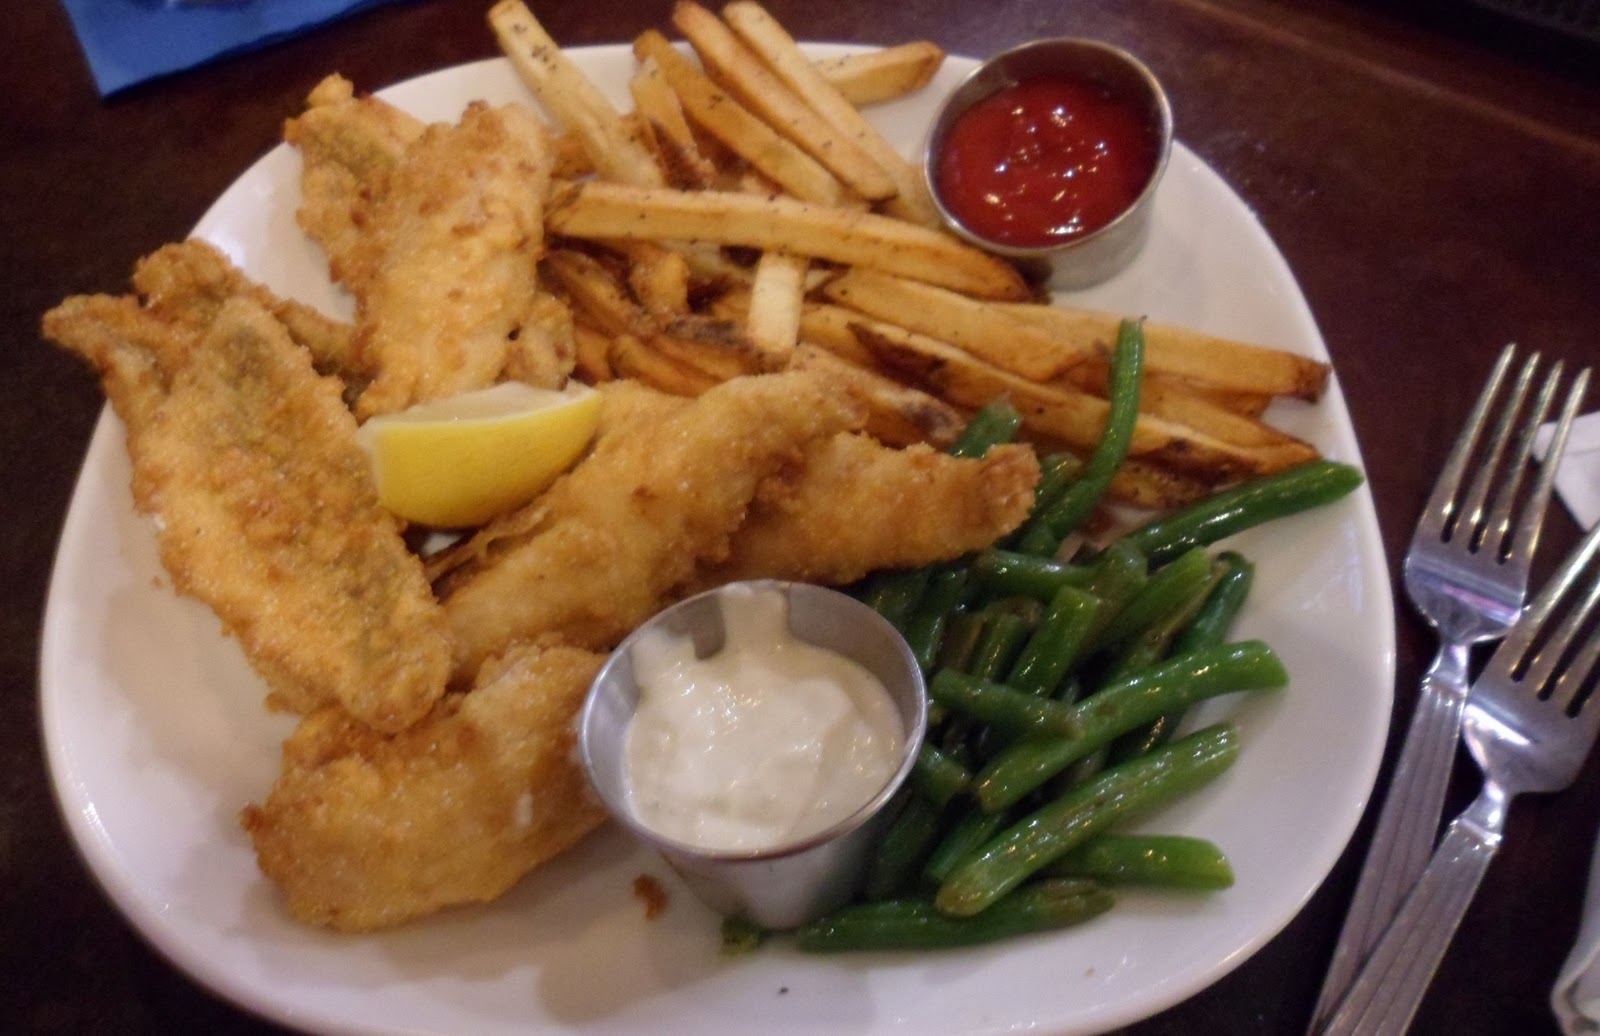 Fish dinner on a white plate including green beans and French fries